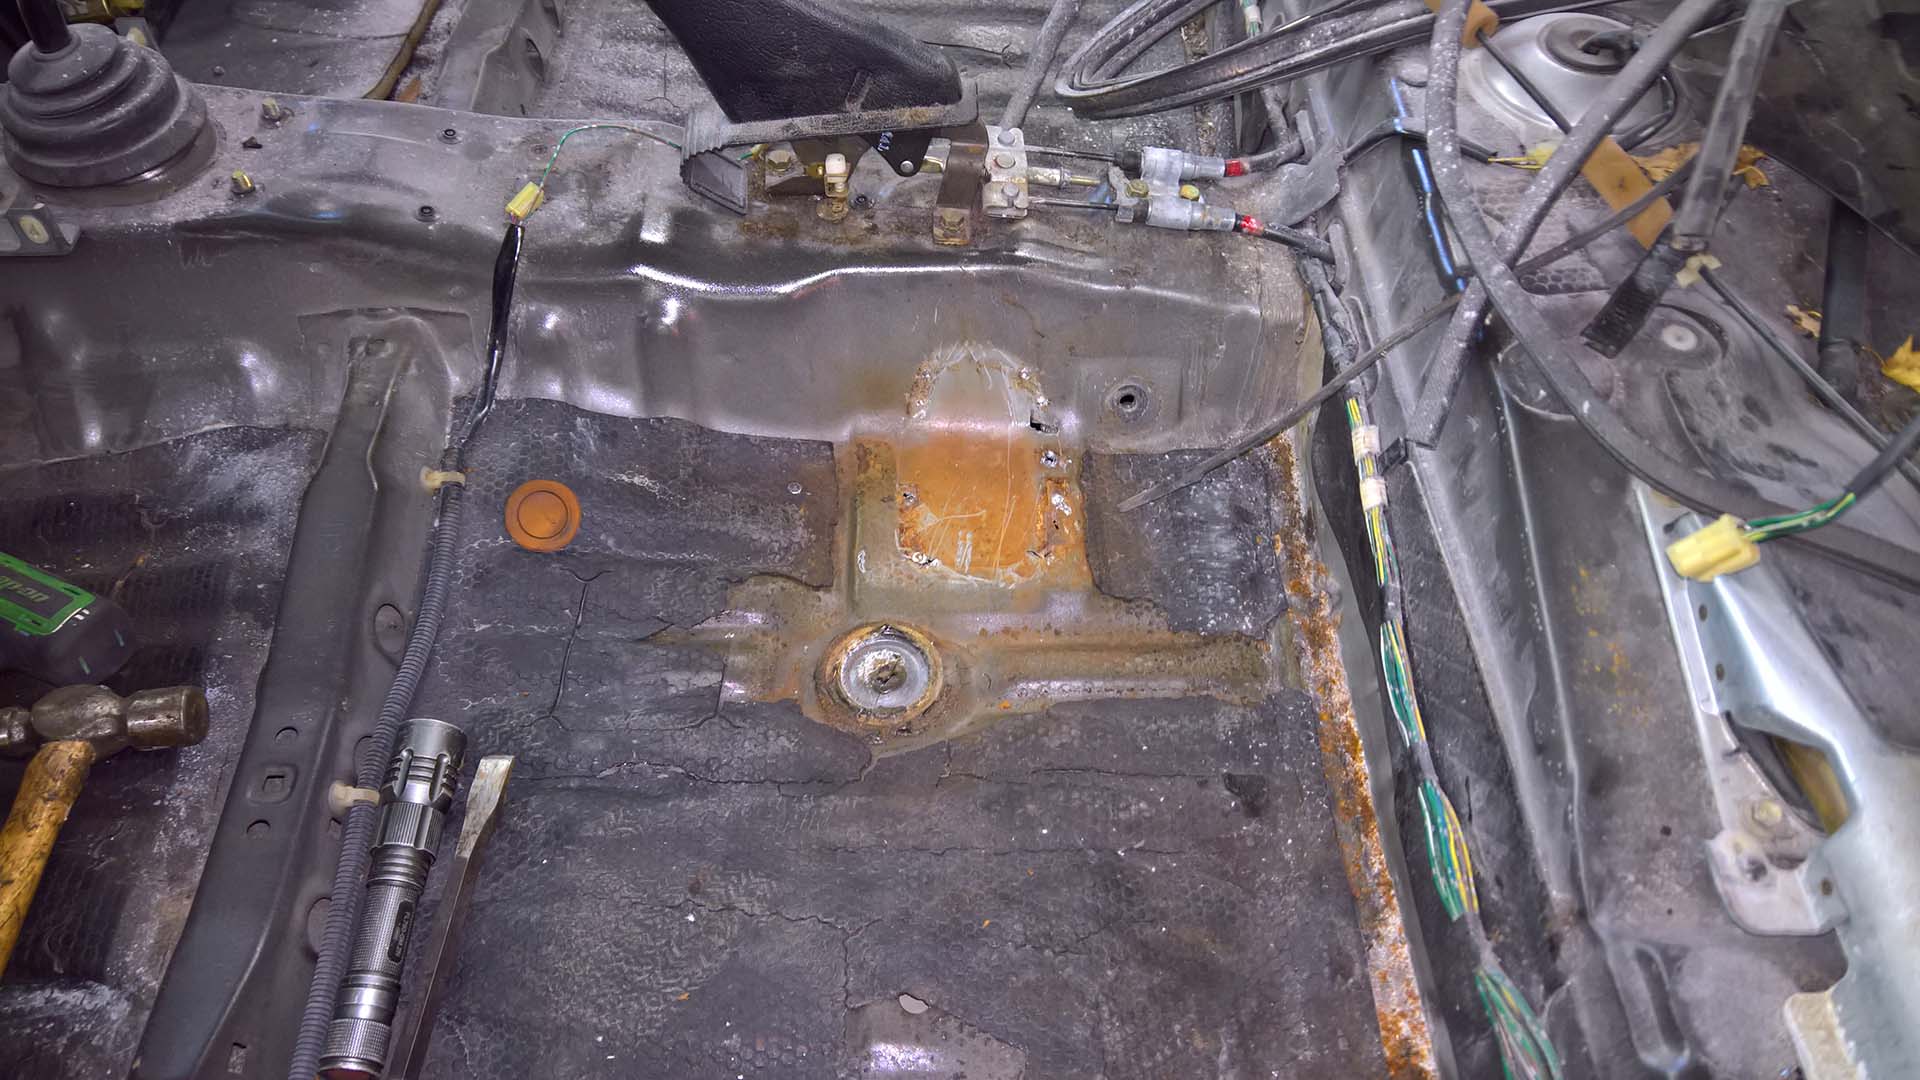 First Seat Anchor Removed